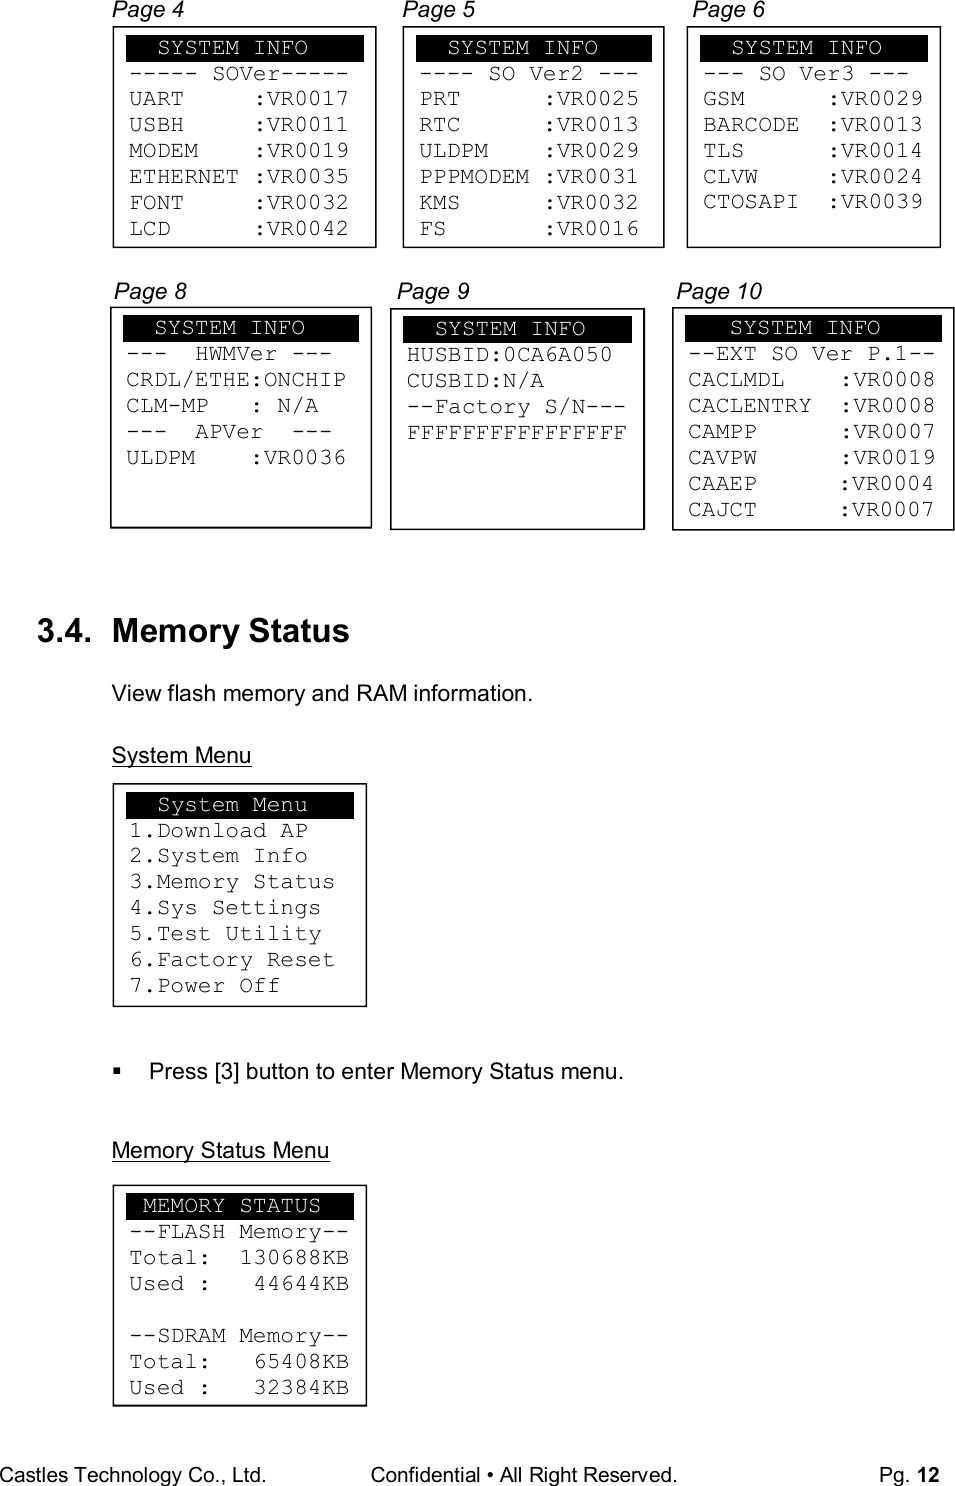 Castles Technology Co., Ltd. Confidential • All Right Reserved.  Pg. 12  Page 4  Page 5  Page 6         Page 8                                 Page 9  Page 10            3.4.  Memory Status View flash memory and RAM information.  System Menu          Press [3] button to enter Memory Status menu.  Memory Status Menu         SYSTEM INFO --- SO Ver3 --- GSM      :VR0029 BARCODE  :VR0013 TLS      :VR0014 CLVW     :VR0024 CTOSAPI  :VR0039   SYSTEM INFO ---  HWMVer --- CRDL/ETHE:ONCHIP CLM-MP   : N/A ---  APVer  --- ULDPM    :VR0036     SYSTEM INFO HUSBID:0CA6A050 CUSBID:N/A --Factory S/N--- FFFFFFFFFFFFFFFF     SYSTEM INFO ----- SOVer----- UART     :VR0017 USBH     :VR0011 MODEM    :VR0019 ETHERNET :VR0035 FONT     :VR0032 LCD      :VR0042   SYSTEM INFO ---- SO Ver2 --- PRT      :VR0025 RTC      :VR0013 ULDPM    :VR0029 PPPMODEM :VR0031 KMS      :VR0032 FS       :VR0016    SYSTEM INFO --EXT SO Ver P.1-- CACLMDL    :VR0008 CACLENTRY  :VR0008 CAMPP      :VR0007 CAVPW      :VR0019 CAAEP   :VR0004 CAJCT  :VR0007   System Menu 1.Download AP 2.System Info 3.Memory Status 4.Sys Settings 5.Test Utility 6.Factory Reset 7.Power Off  MEMORY STATUS --FLASH Memory-- Total:  130688KB Used :   44644KB  --SDRAM Memory-- Total:   65408KB Used :   32384KB 